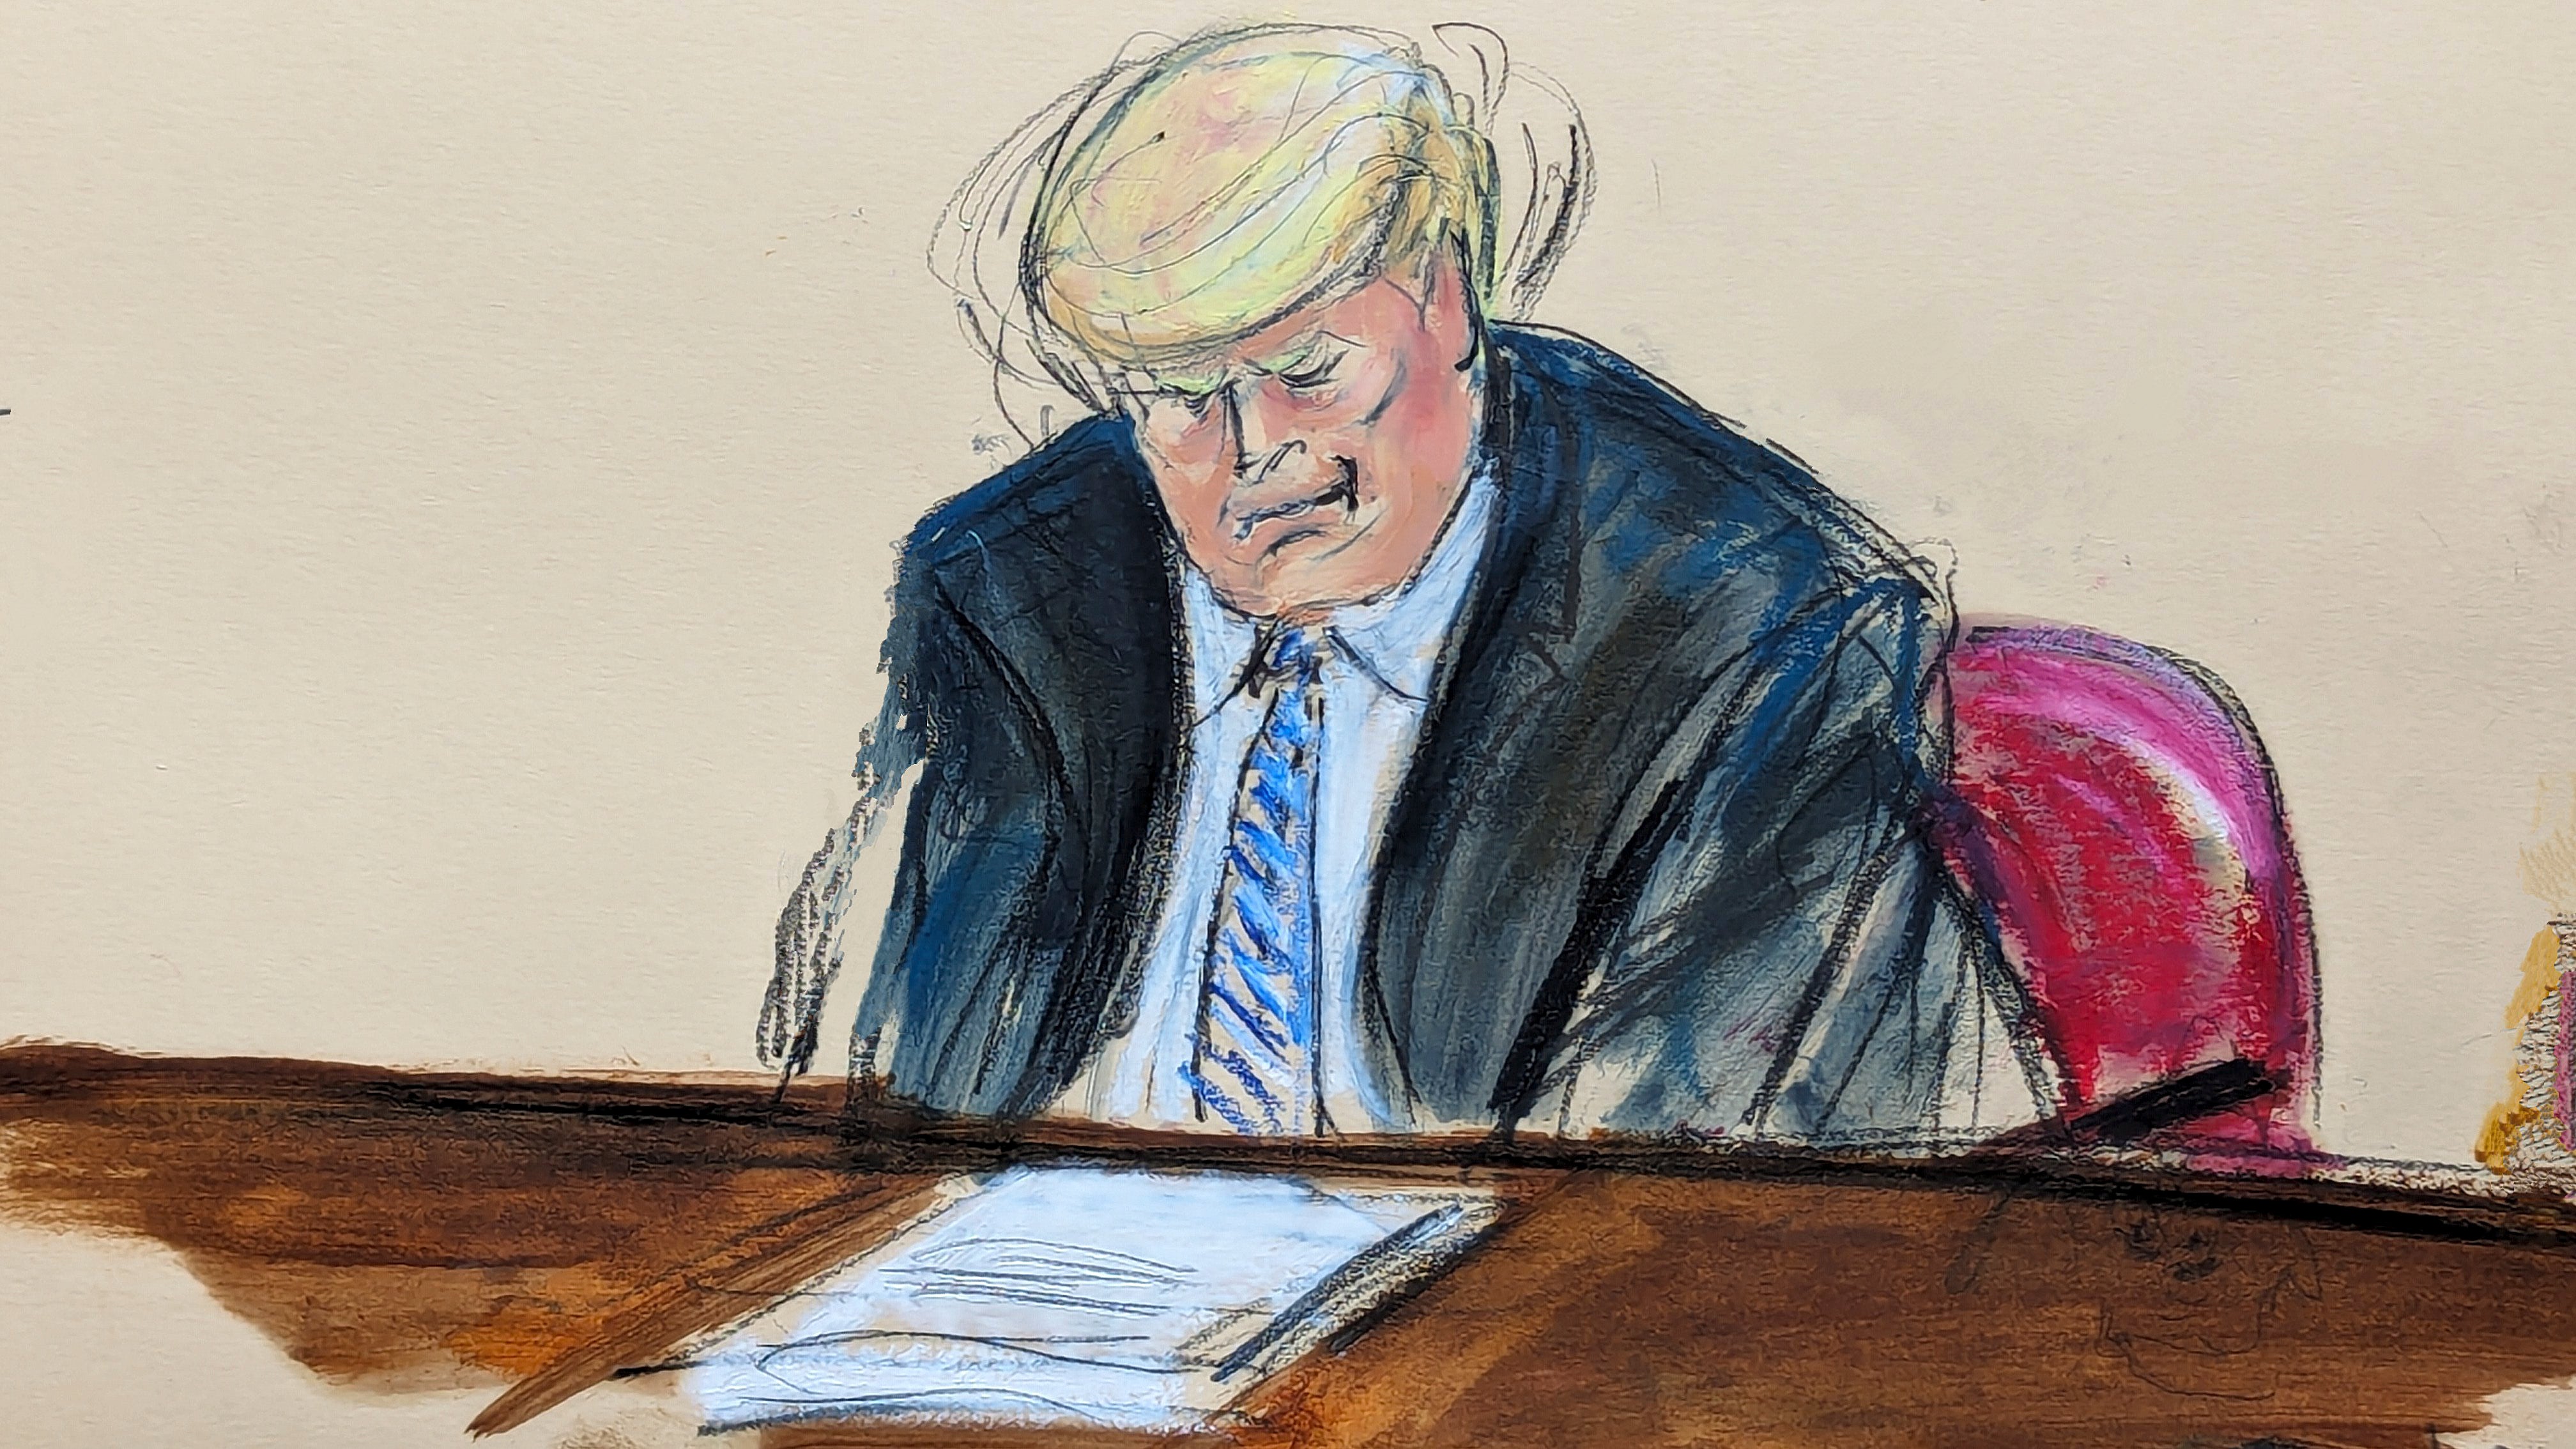 A courtroom sketch depicts Donald Trump shaking his head during Michael Cohen’s testimony in his hush money trial on 13 May.